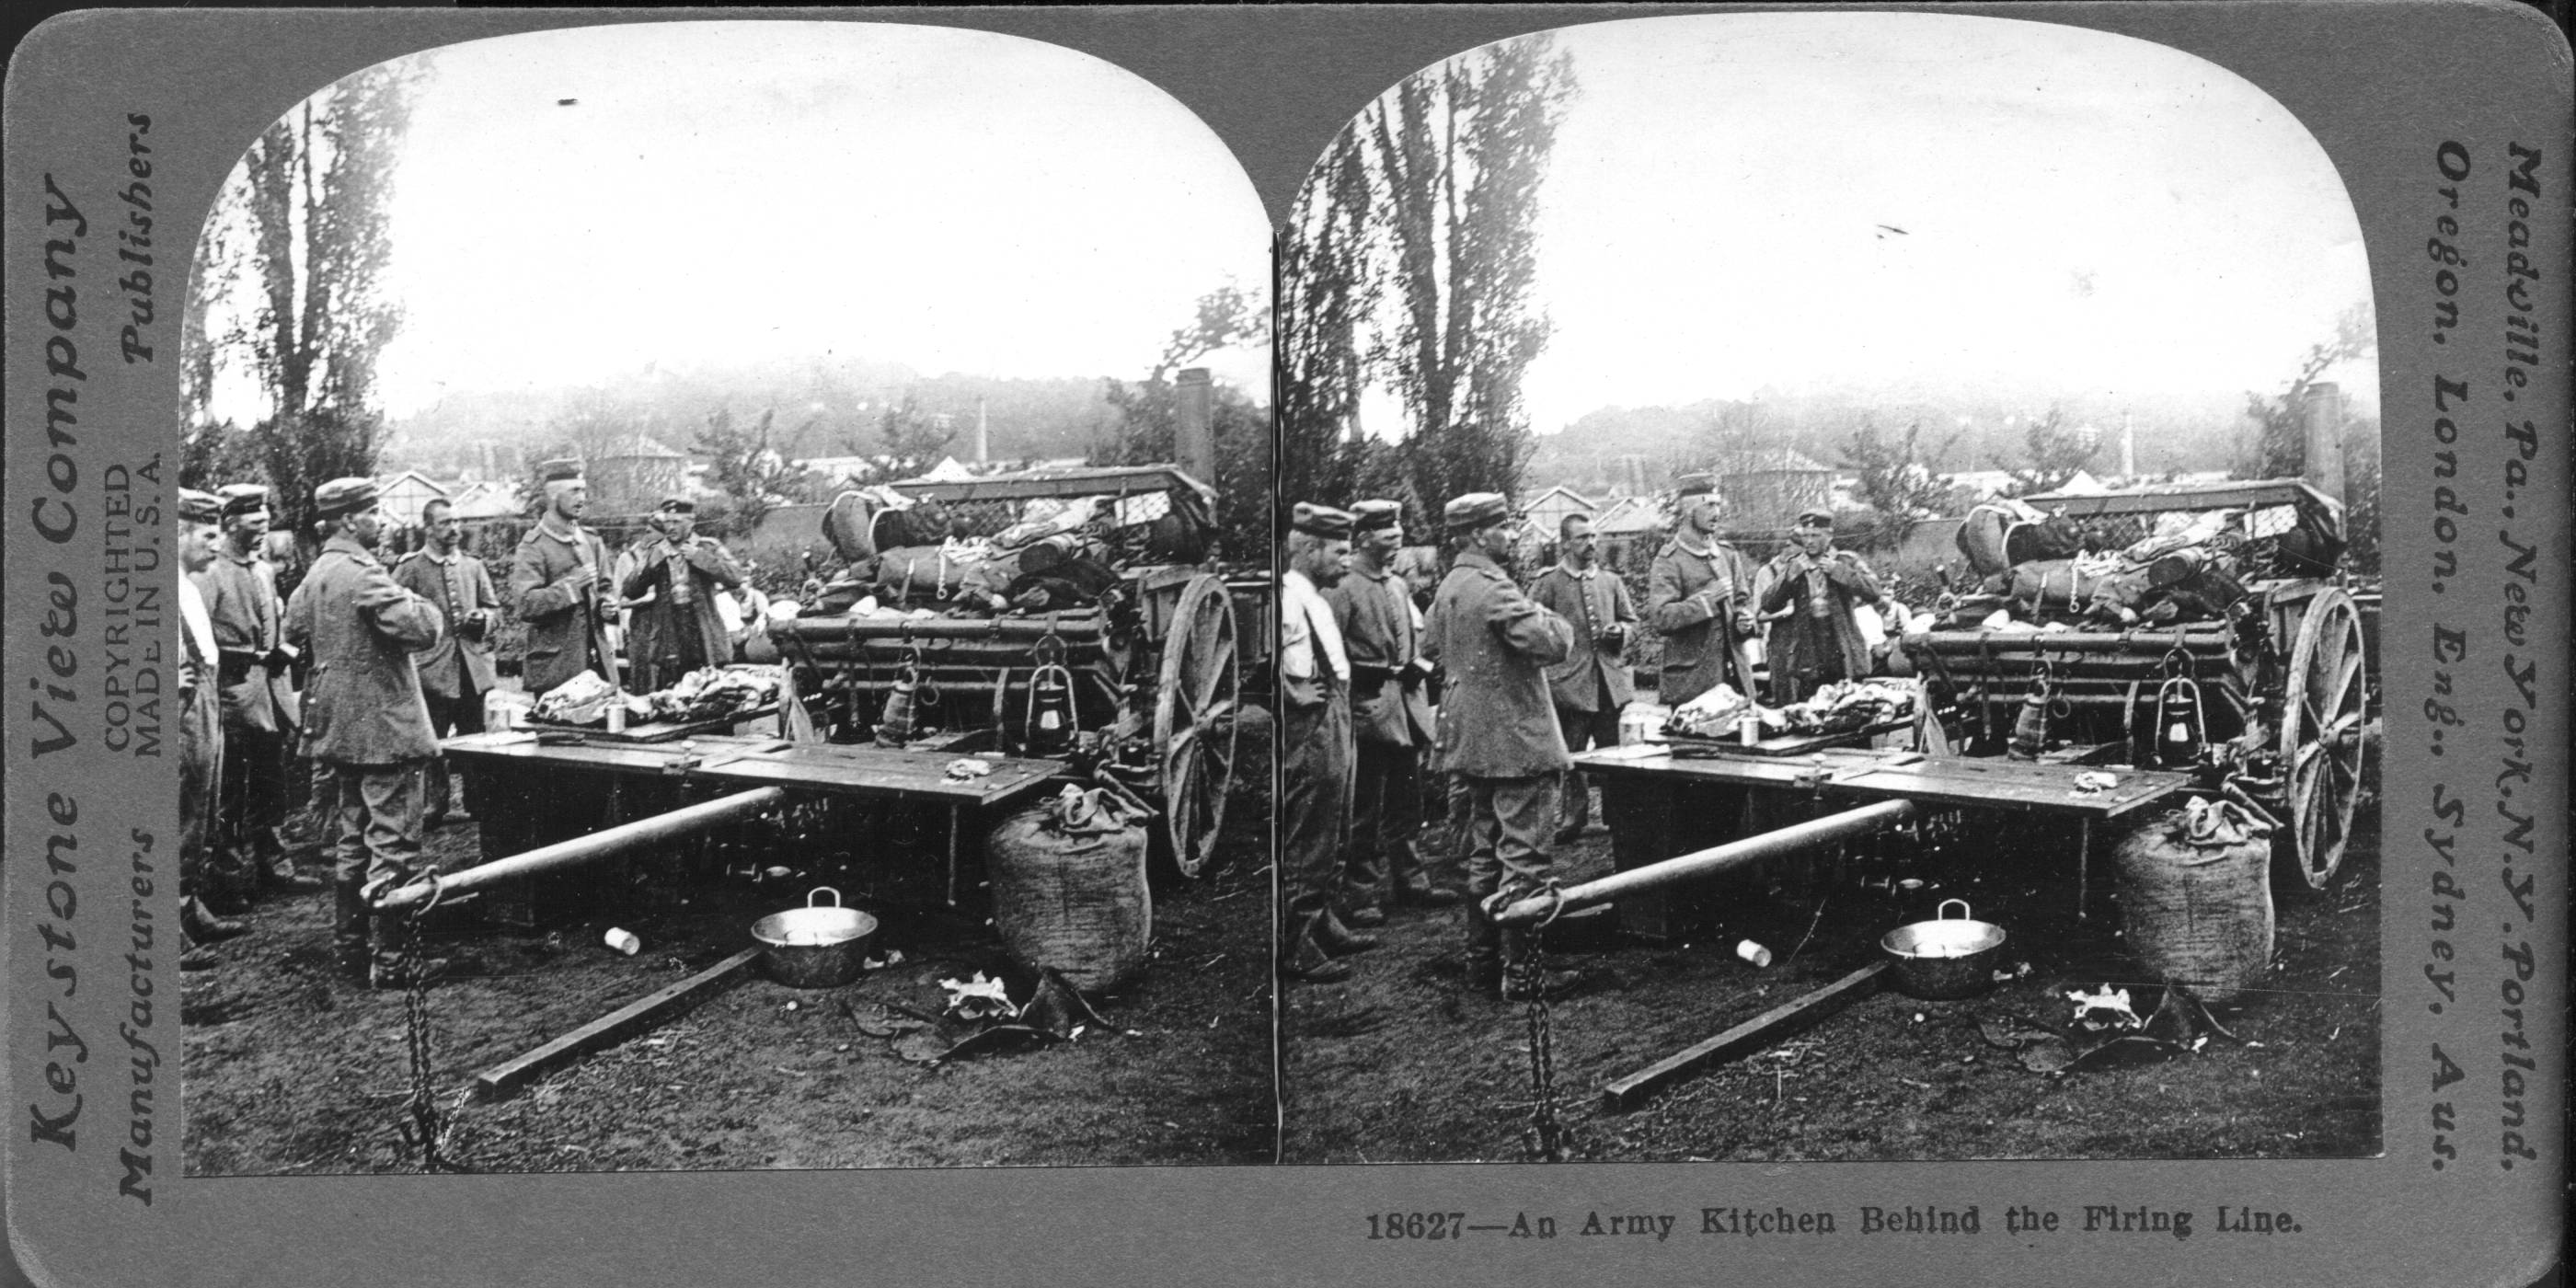 An Army Kitchen Behind the Firing Line